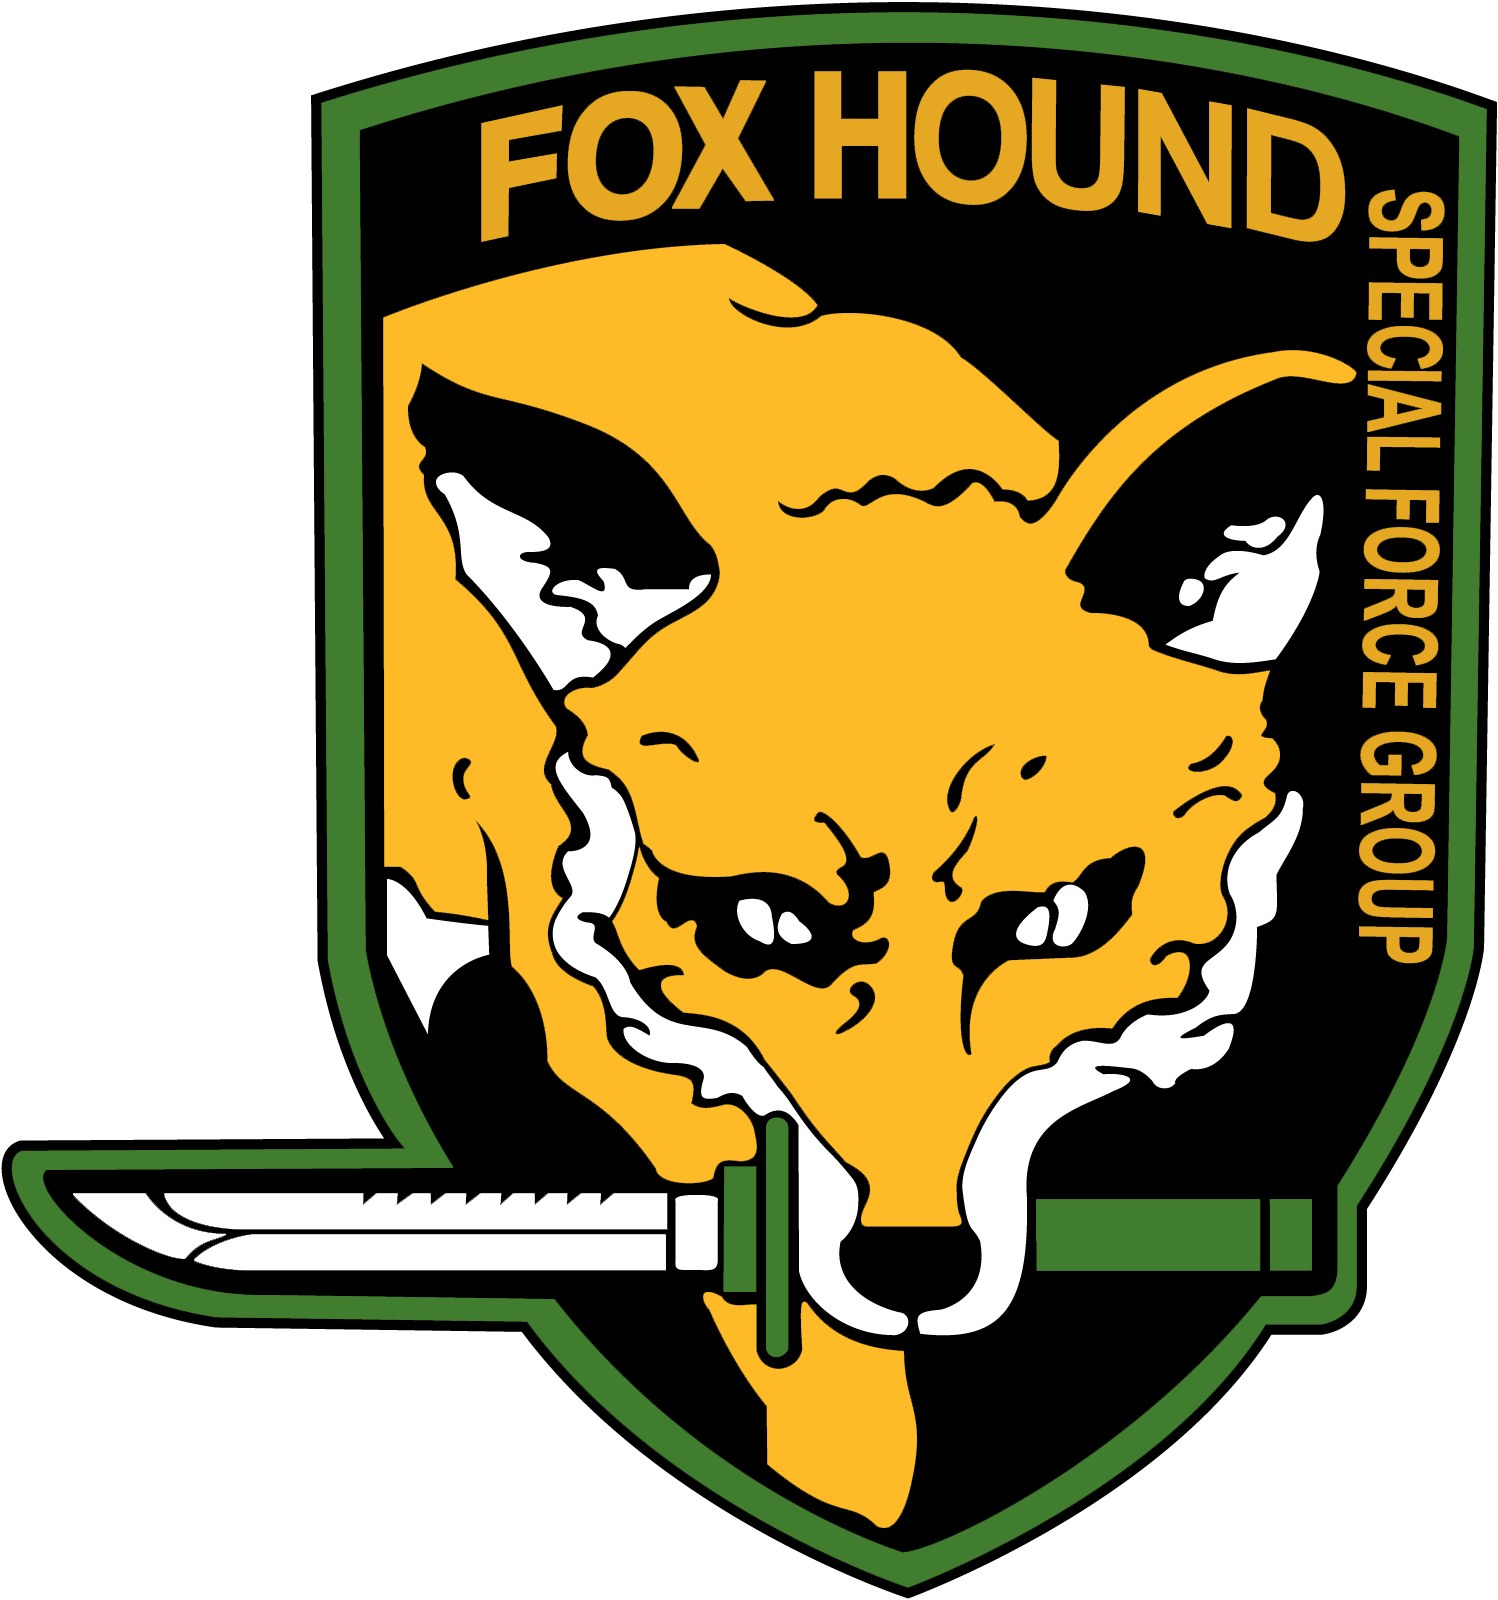 Fox Hound Tactical Espionage Action Metal Gear Solid Gucci Air